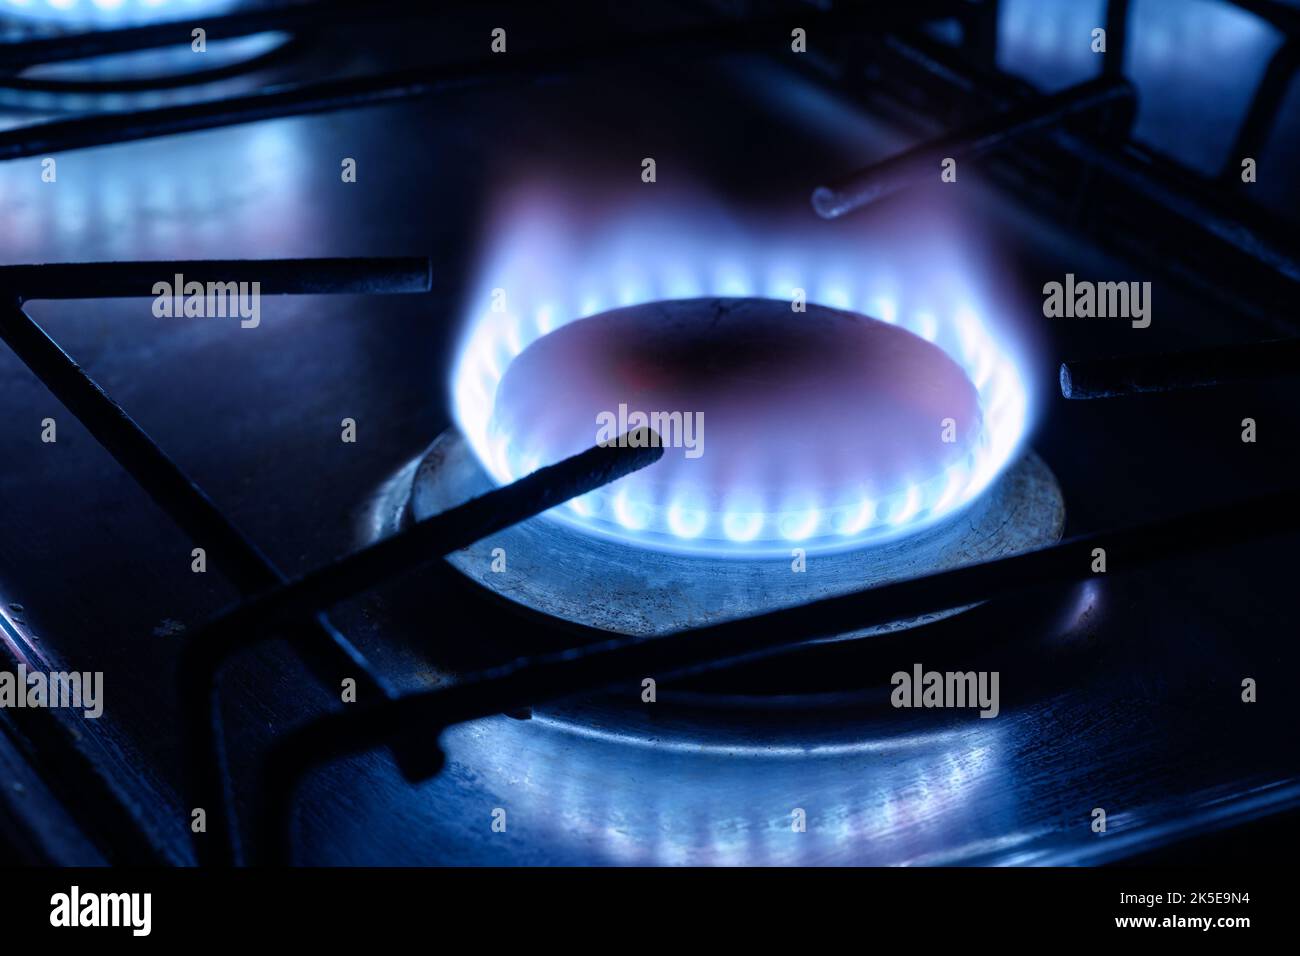 Gas burns in dark at home, blue fire flame of stove ring burners. Concept of natural pipeline gas cost and payment, energy crisis in Europe, supply in Stock Photo